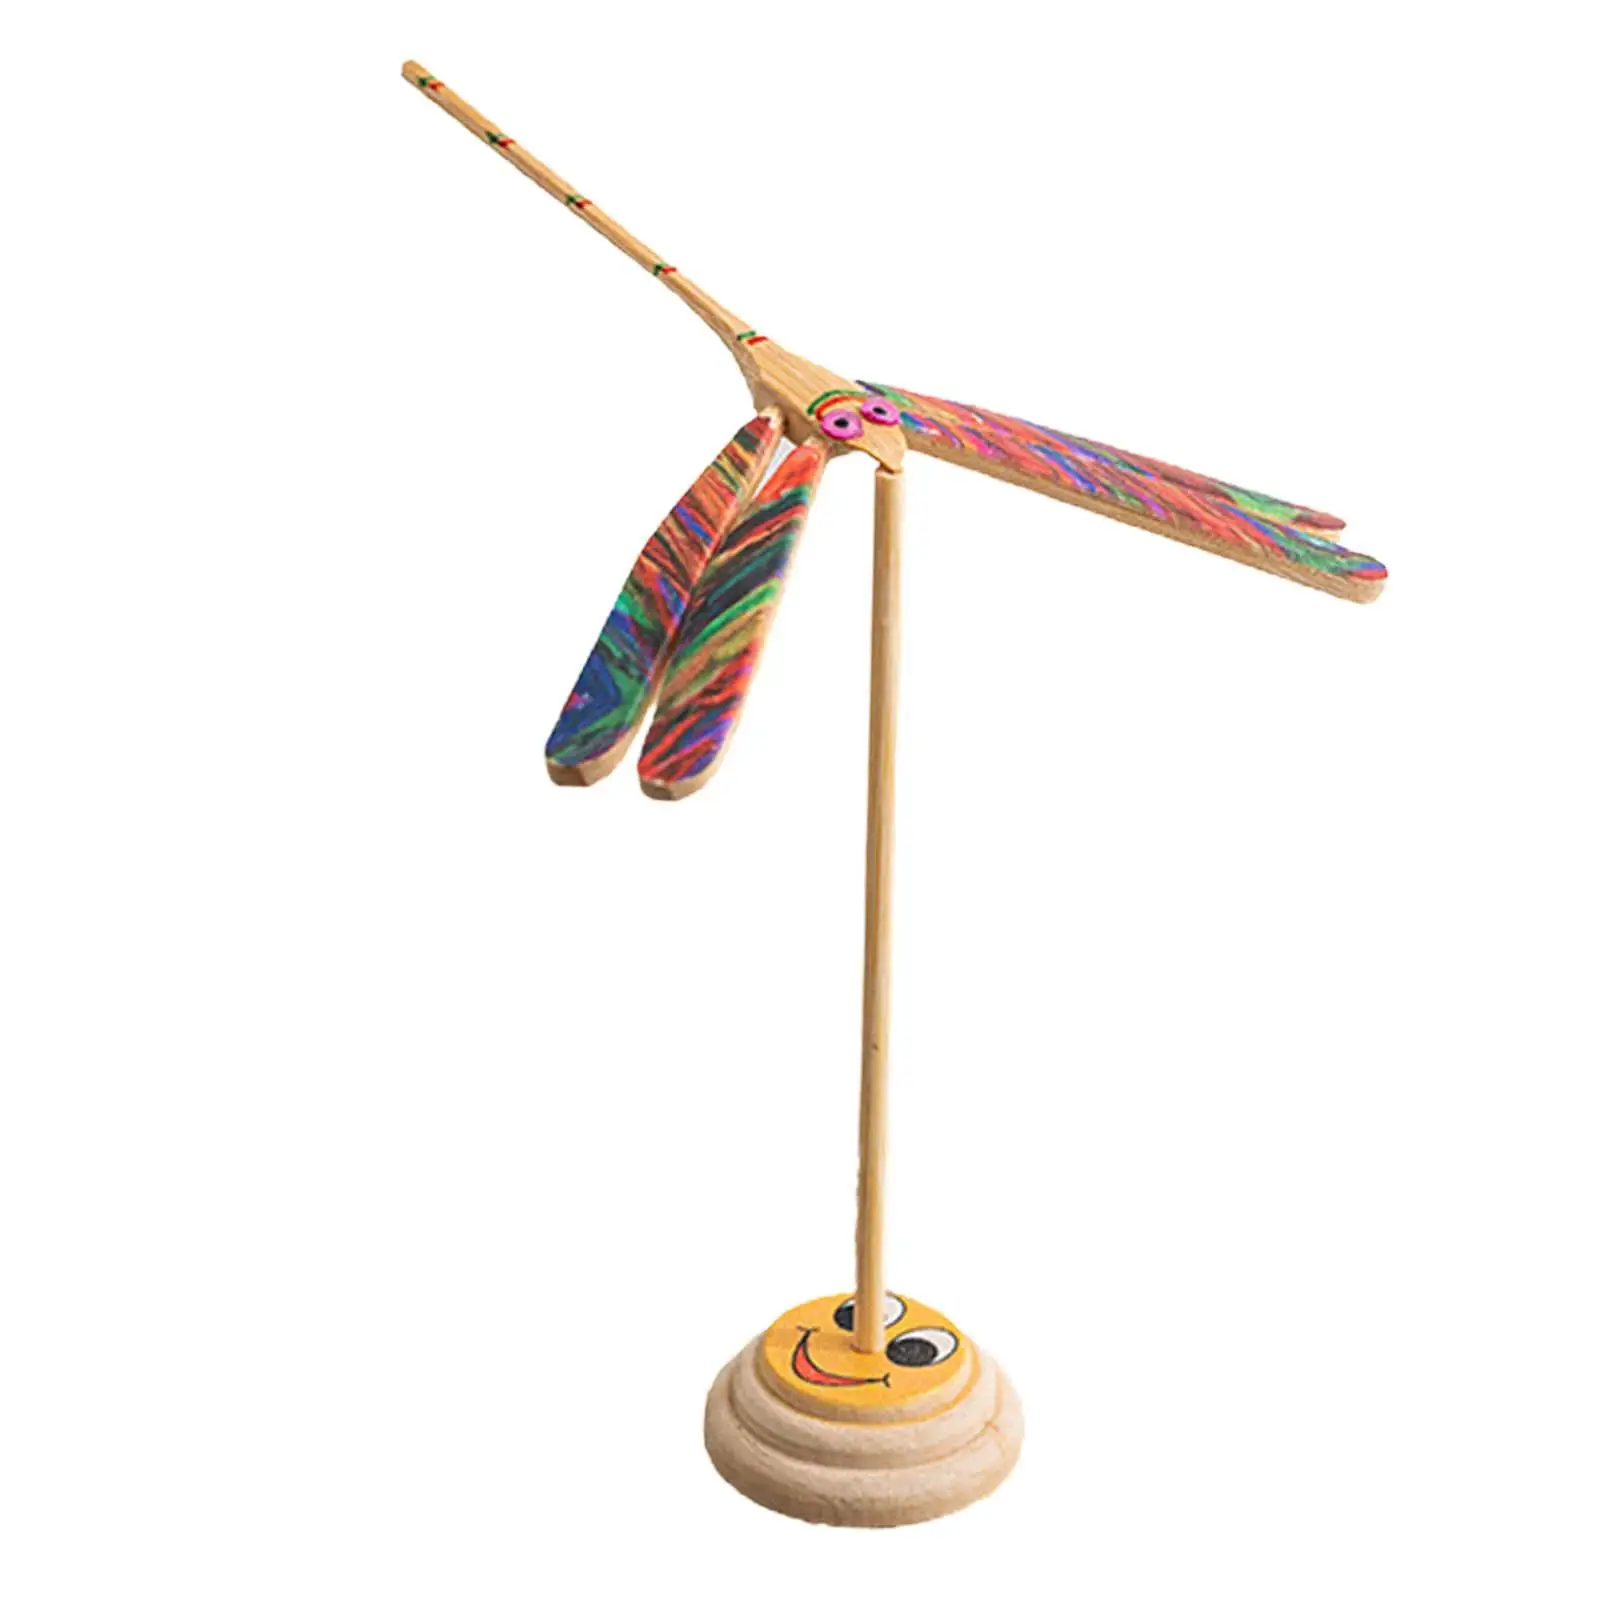 Flying Helicopter Toy Ornaments Nostalgic with Stable Base Bamboo Dragonfly Toy for Bedroom Gift Countertop Home Decor Birthdays